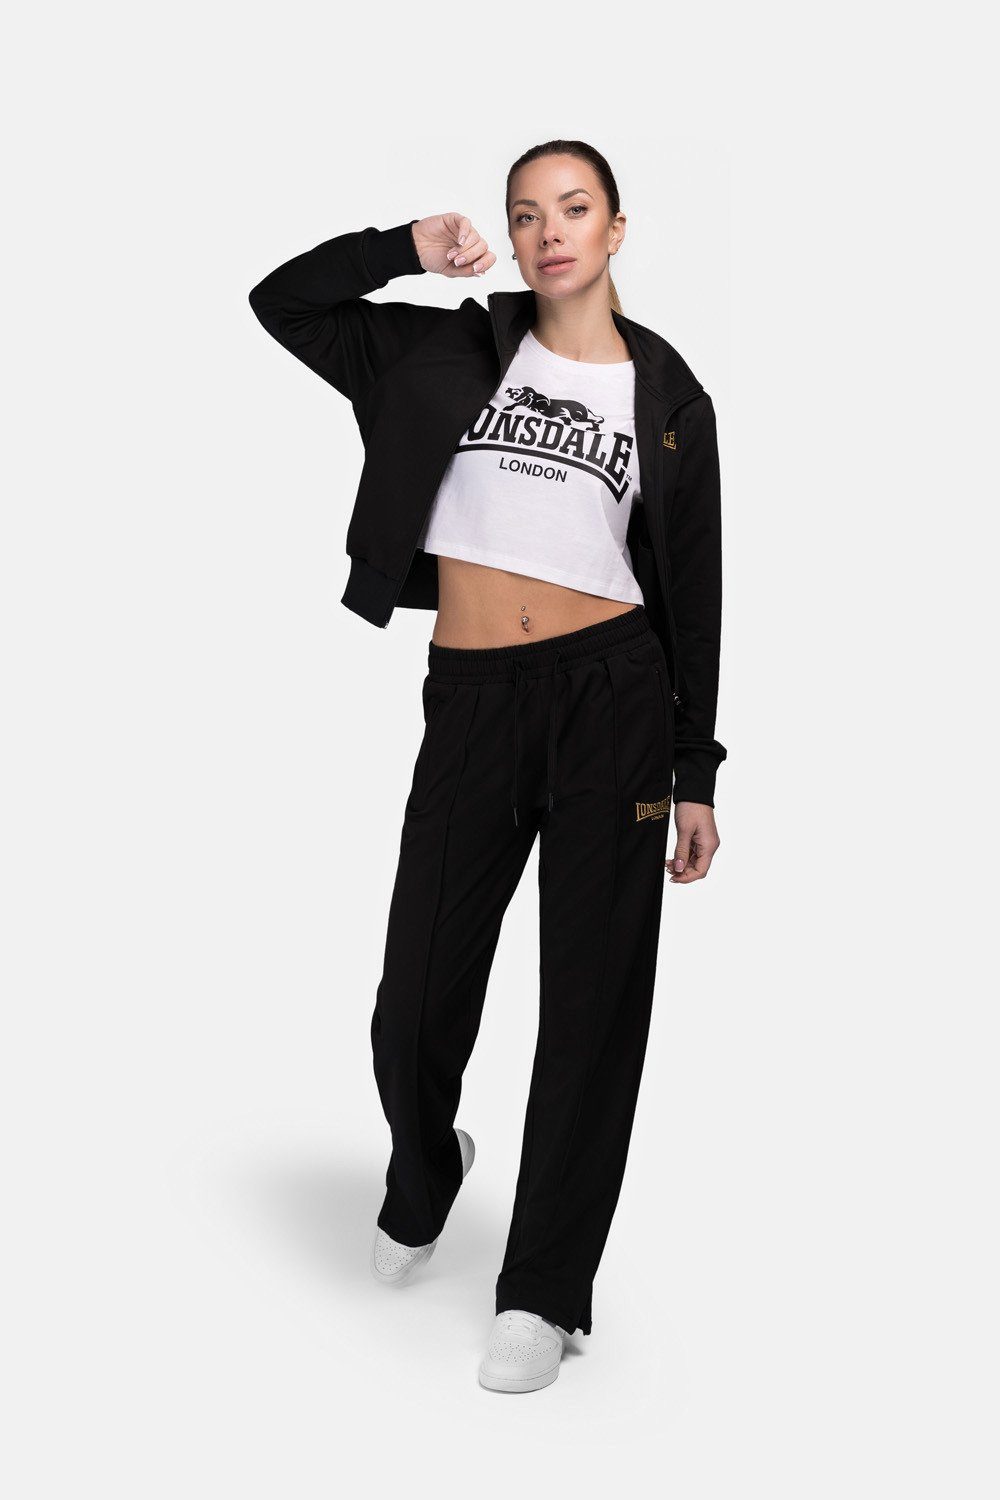 Lonsdale tracksuit Boswall - Tracksuits - Lonsdale London